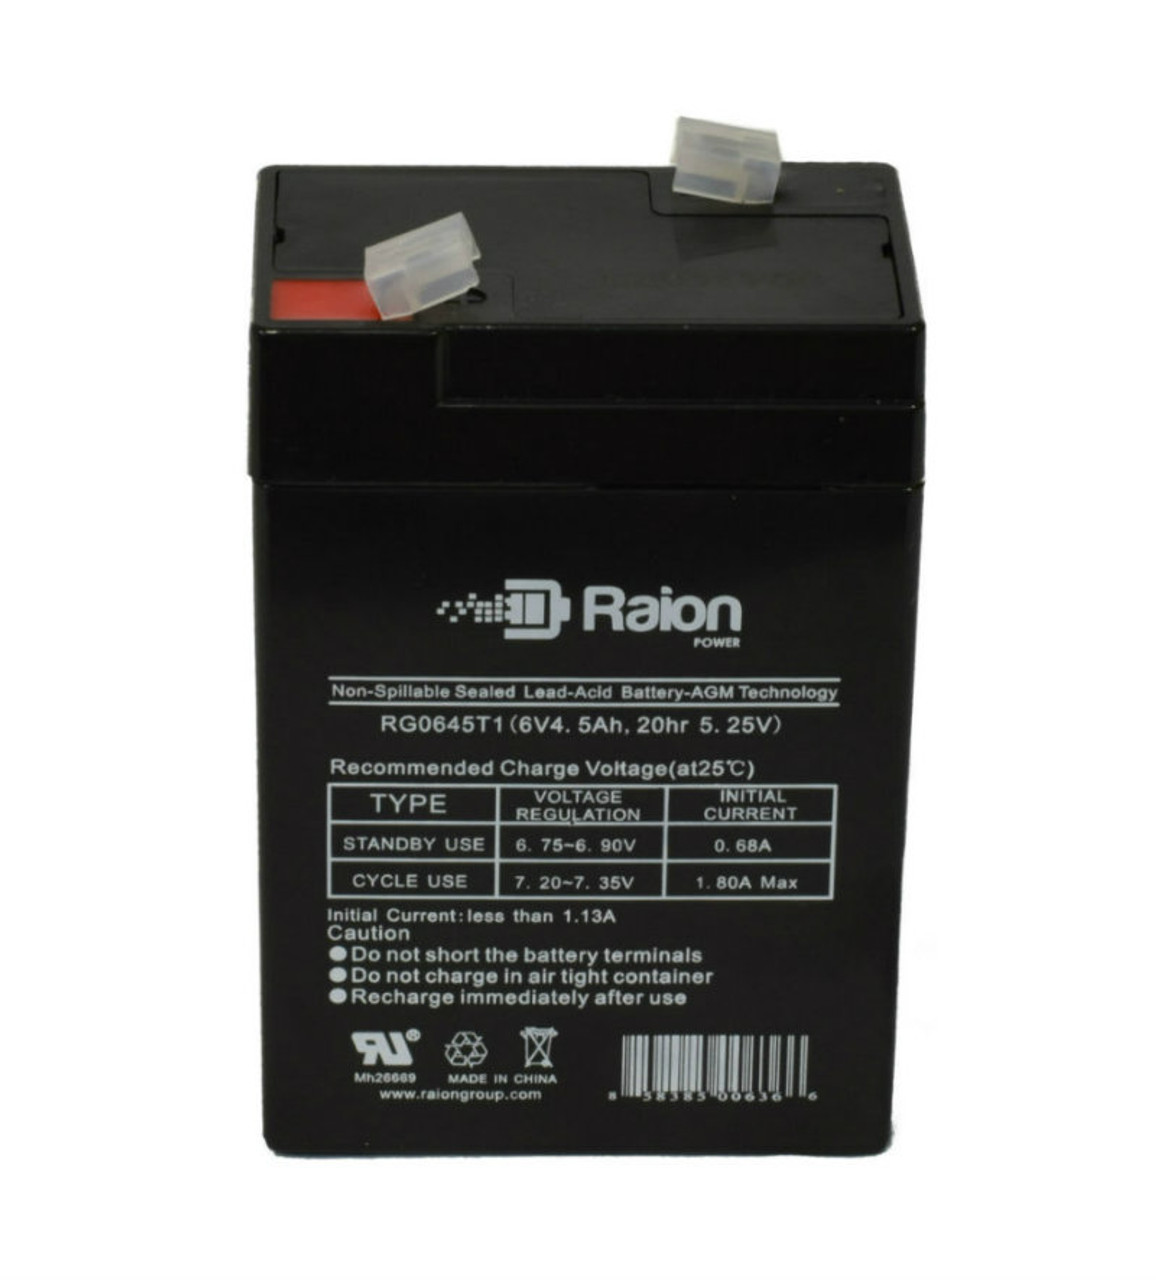 Raion Power RG0645T1 Replacement Battery Cartridge for Baxter Healthcare Ericsson Stat Meter SM02